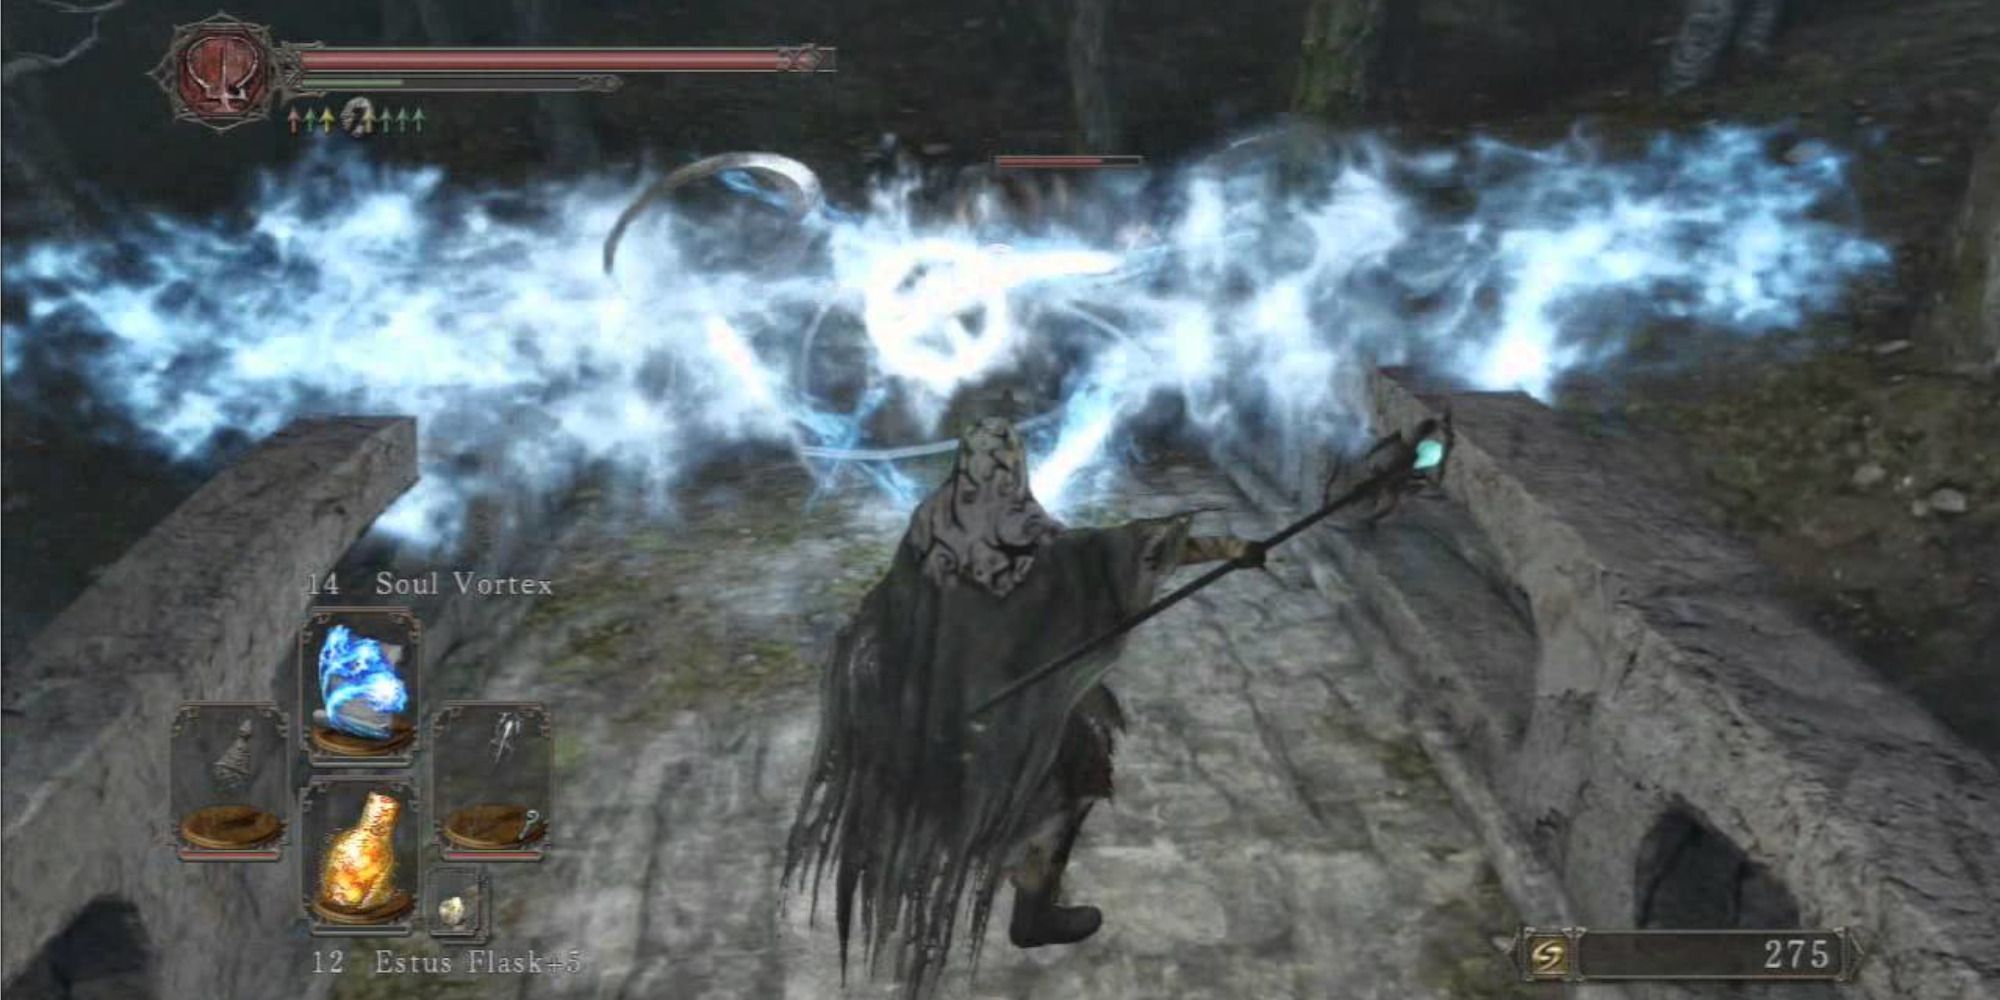 A player using the Soul Vortex Sorcery, wearing the Hexer's Hood and using the Staff of Wisdom